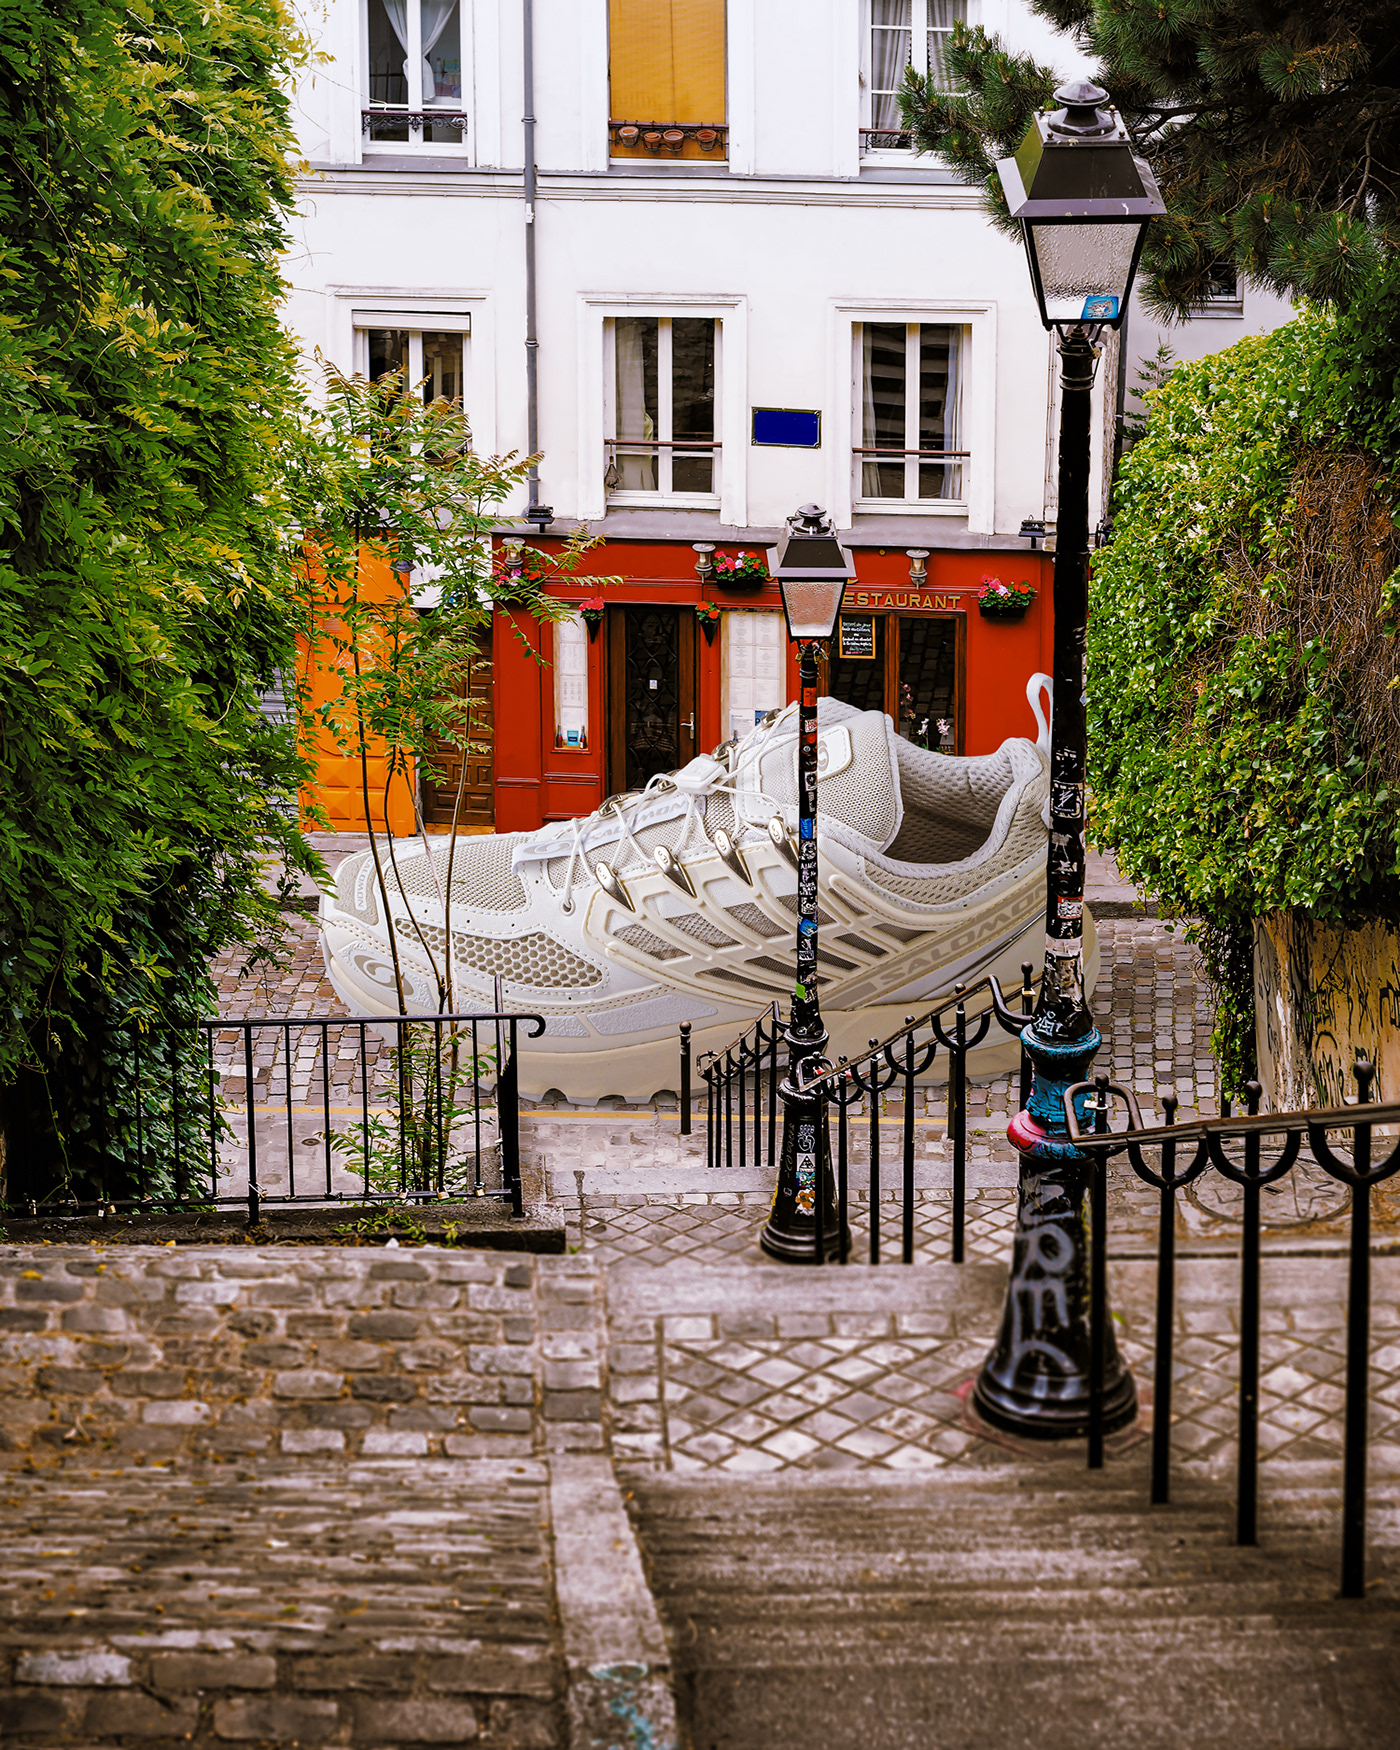 Giant sneaker photo composite in Paris. Retouching using Photoshop